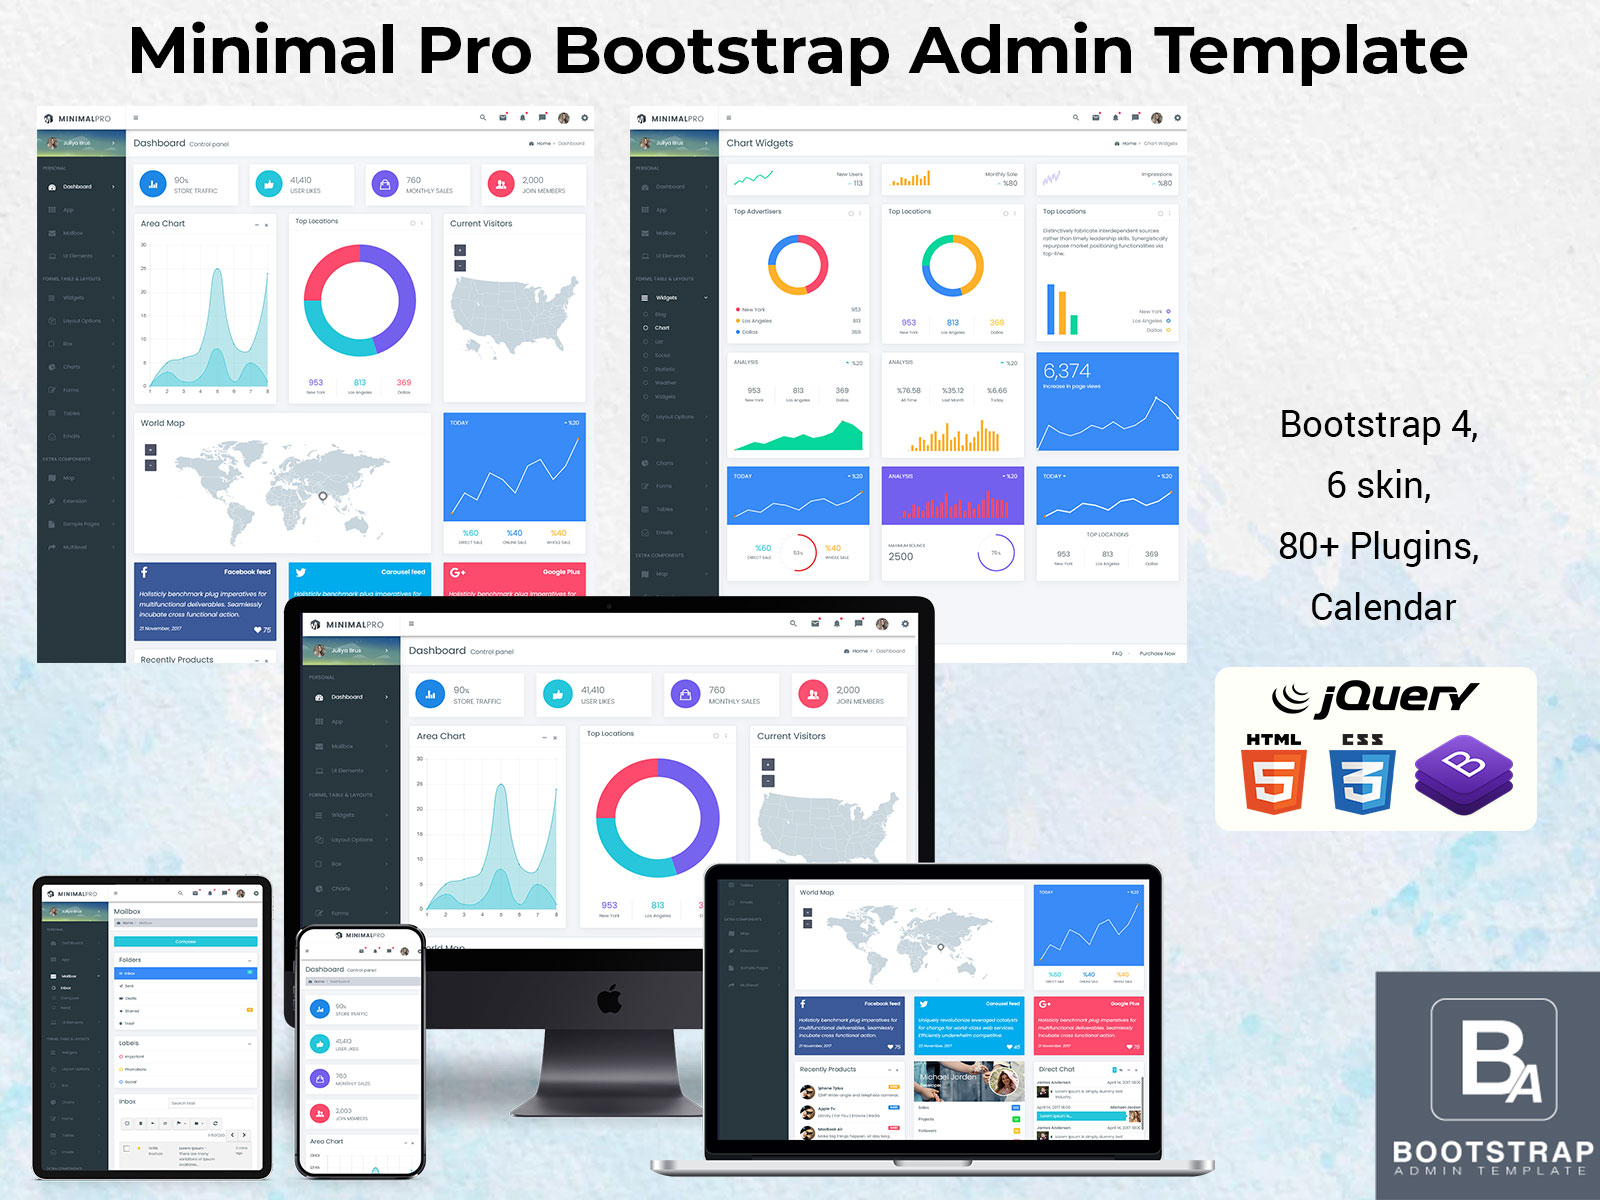 Minimal Pro – Advanced And More Customizable Bootstrap Admin Templates